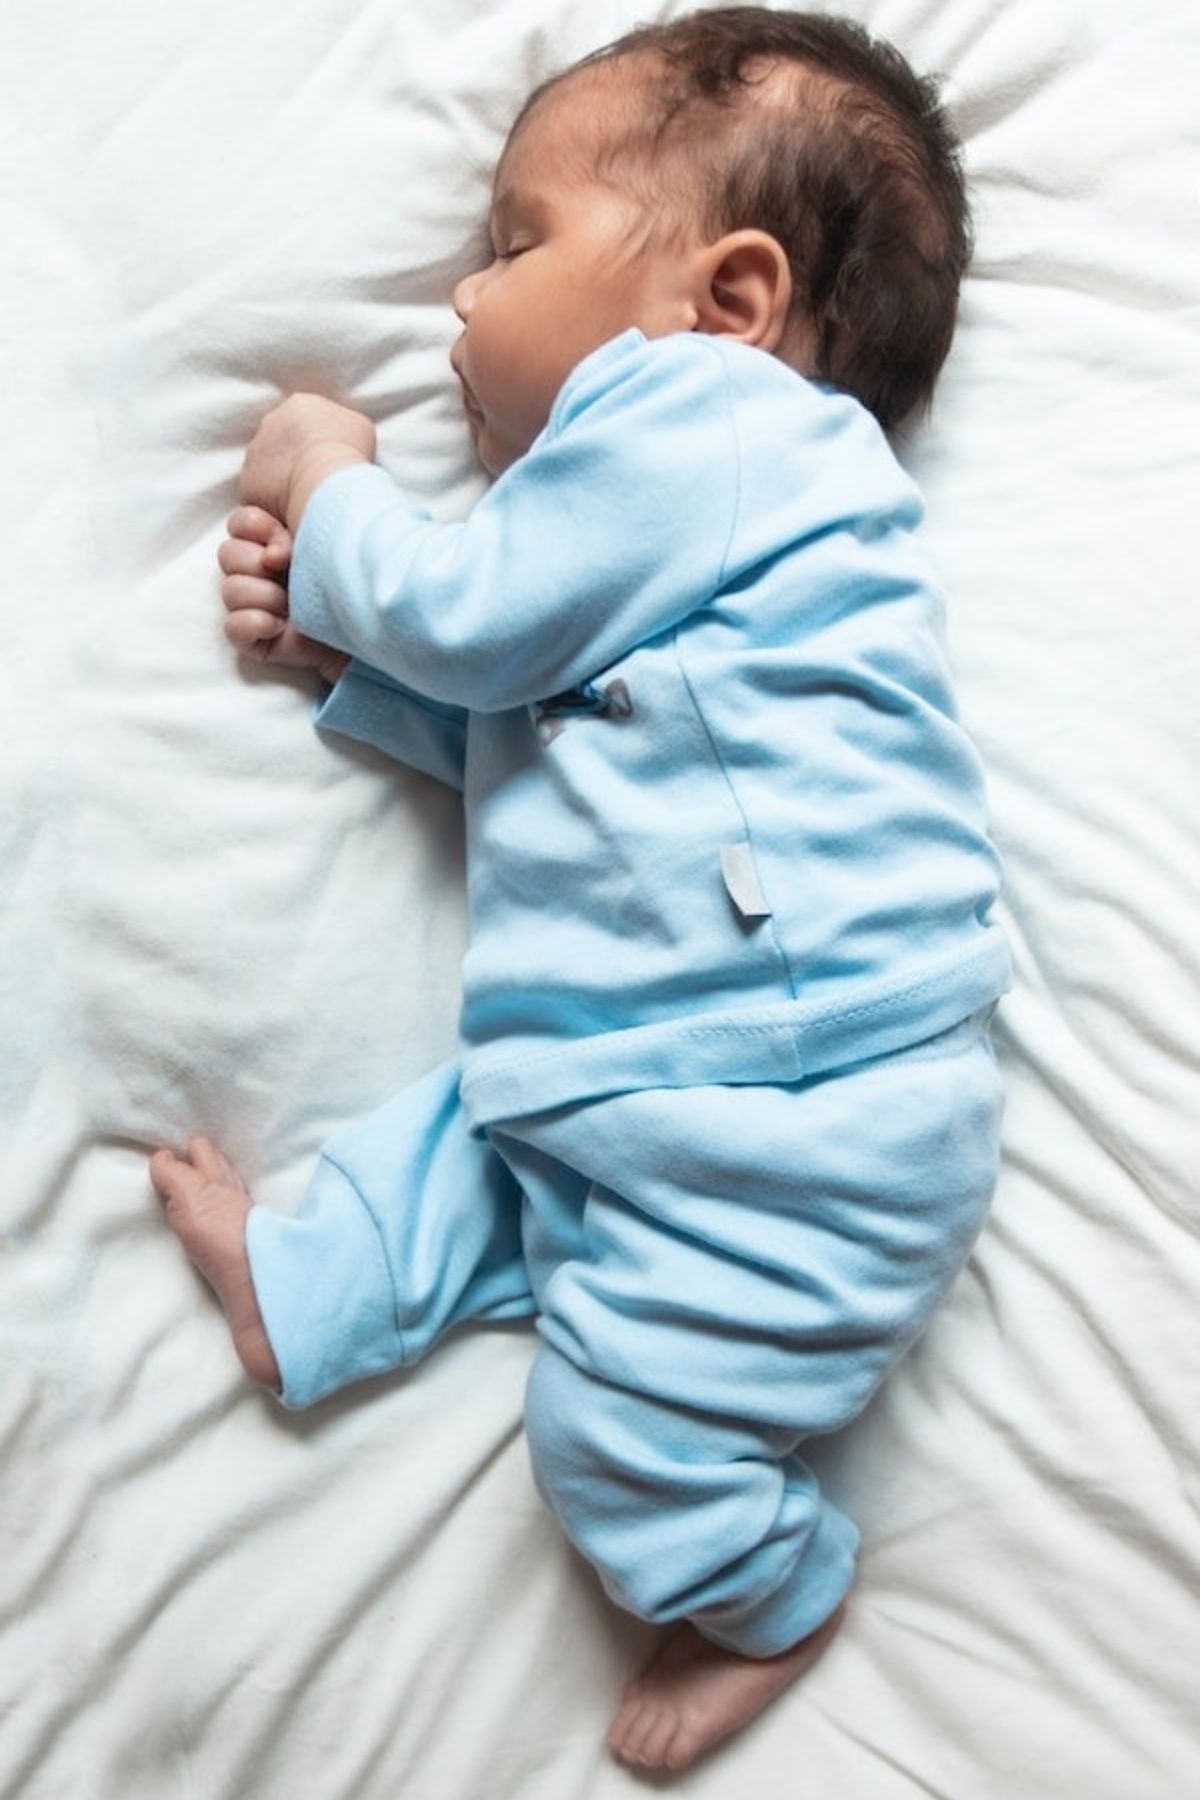 Baby boy wearing blue outfit lays on side while sleeping on white sheet.